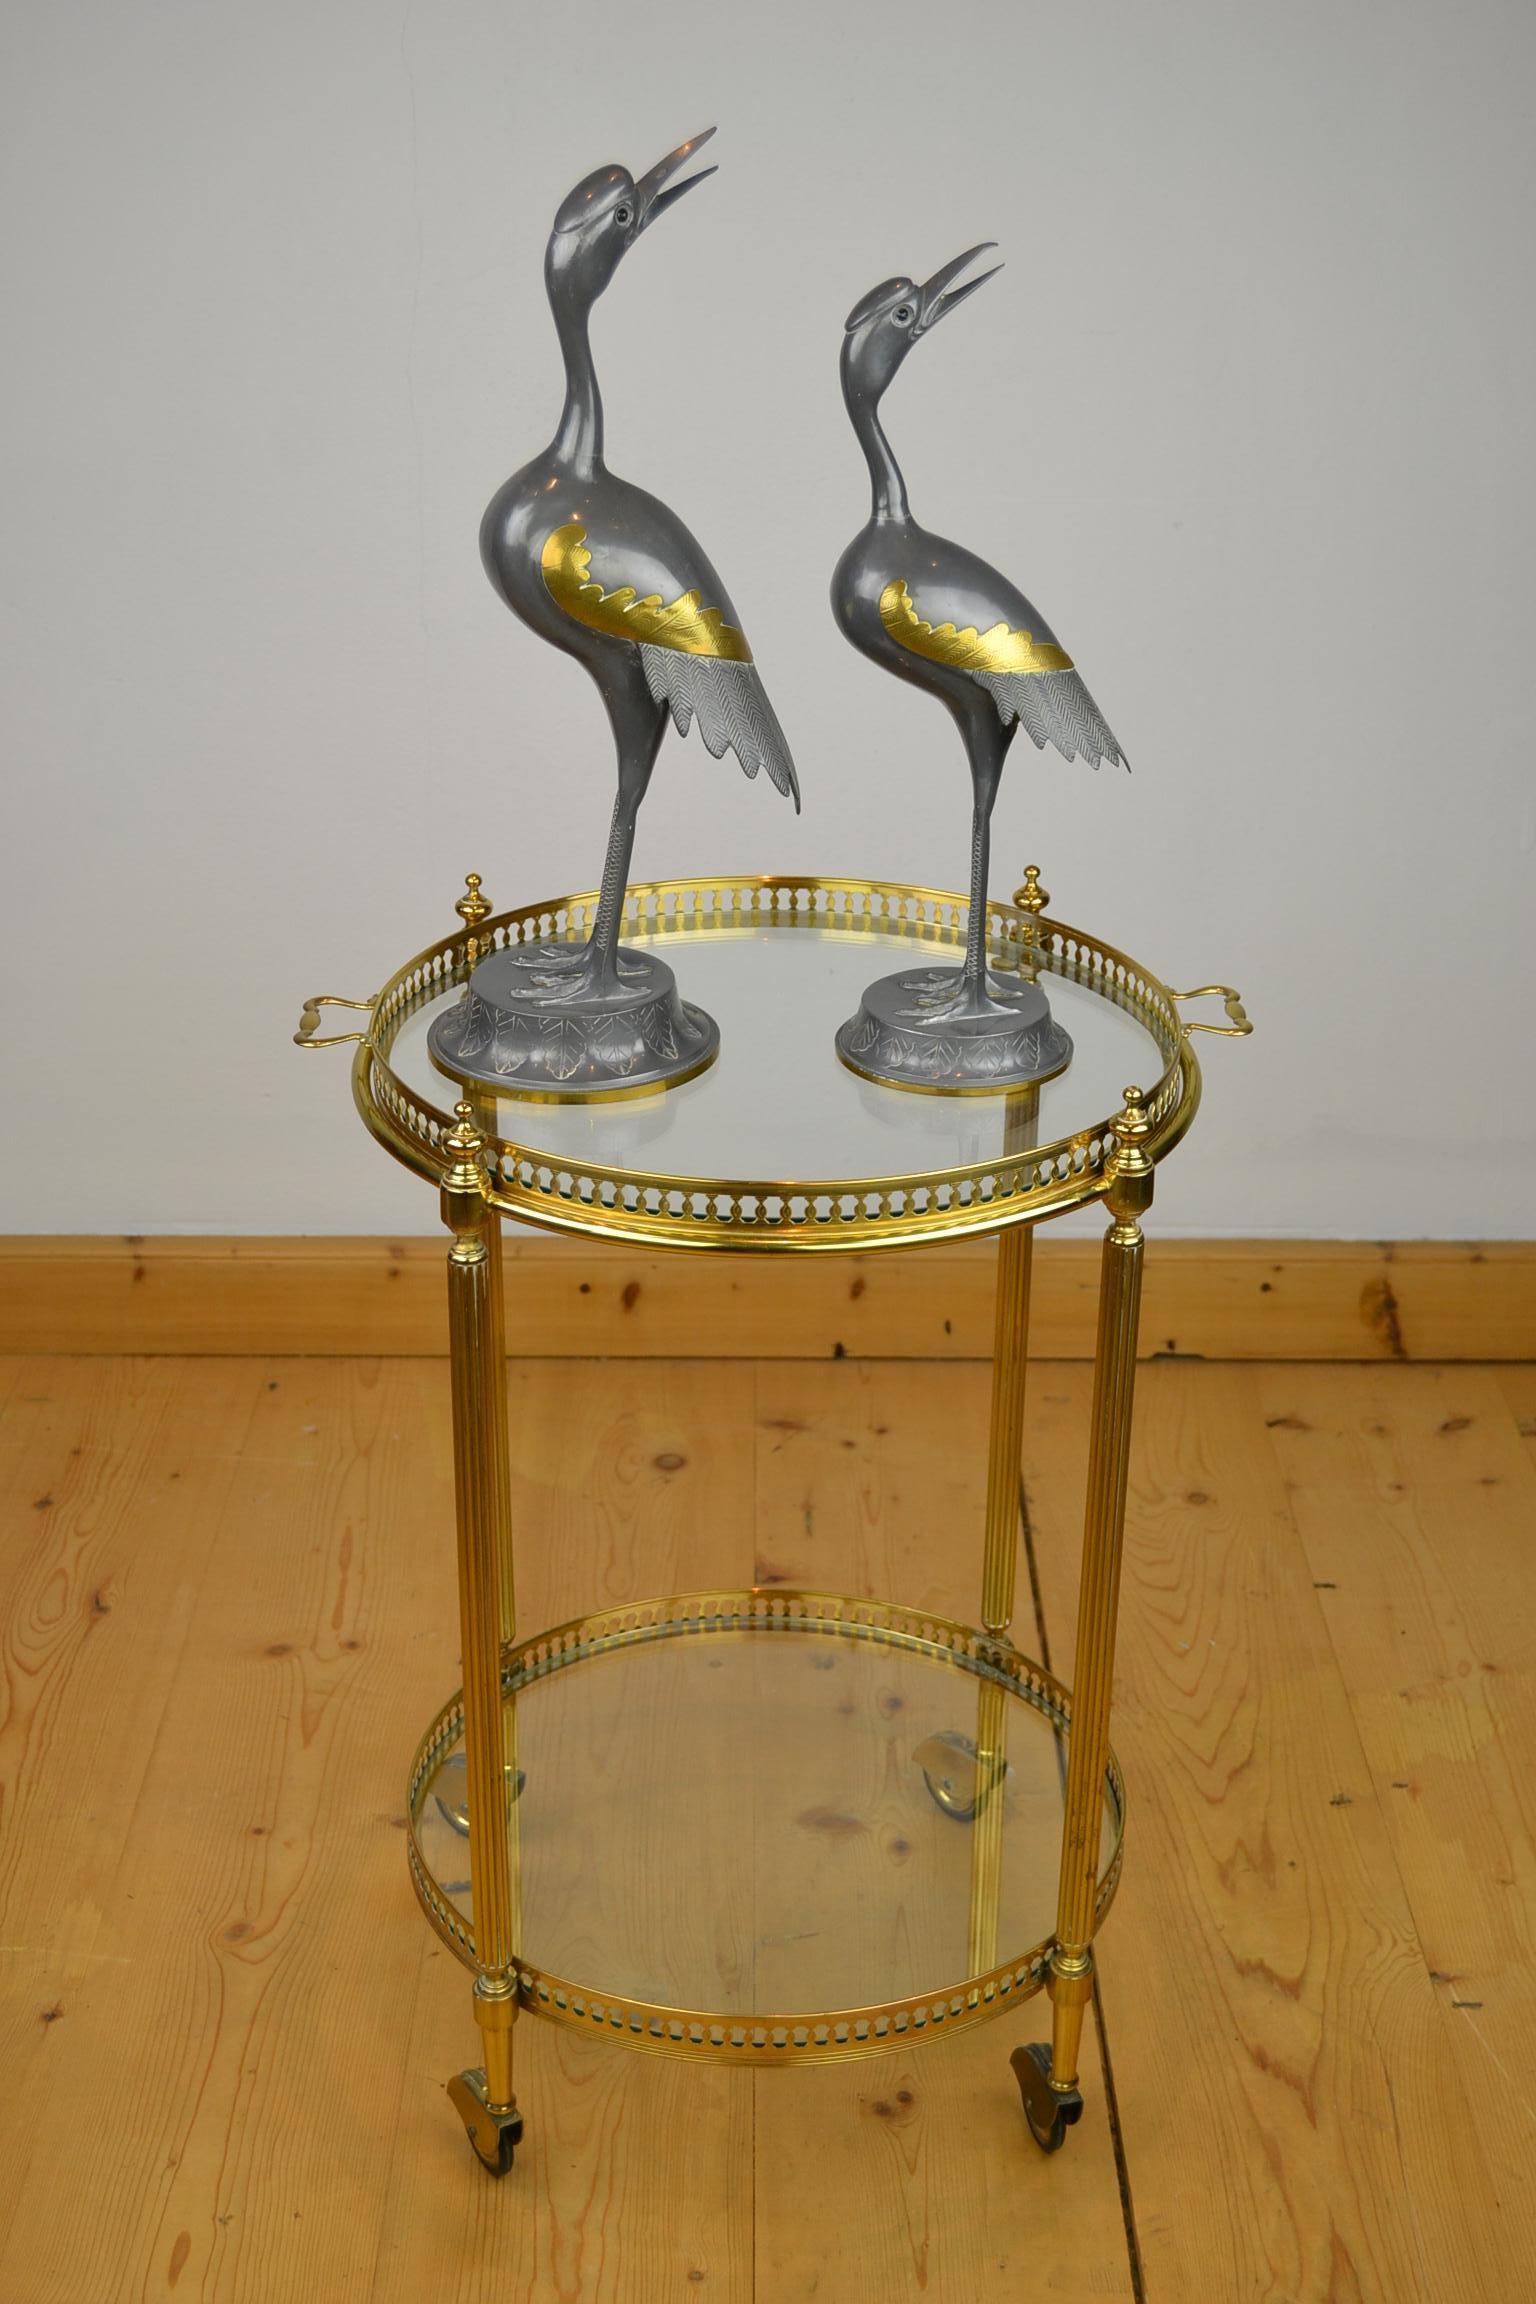 Stylish set of 2 vintage metal with brass bird sculptures - Heron Sculptures from the 1970s. These animal sculptures are beautiful decorative objects with a touch of golden details. They are in good condition with minor superficial scratches in